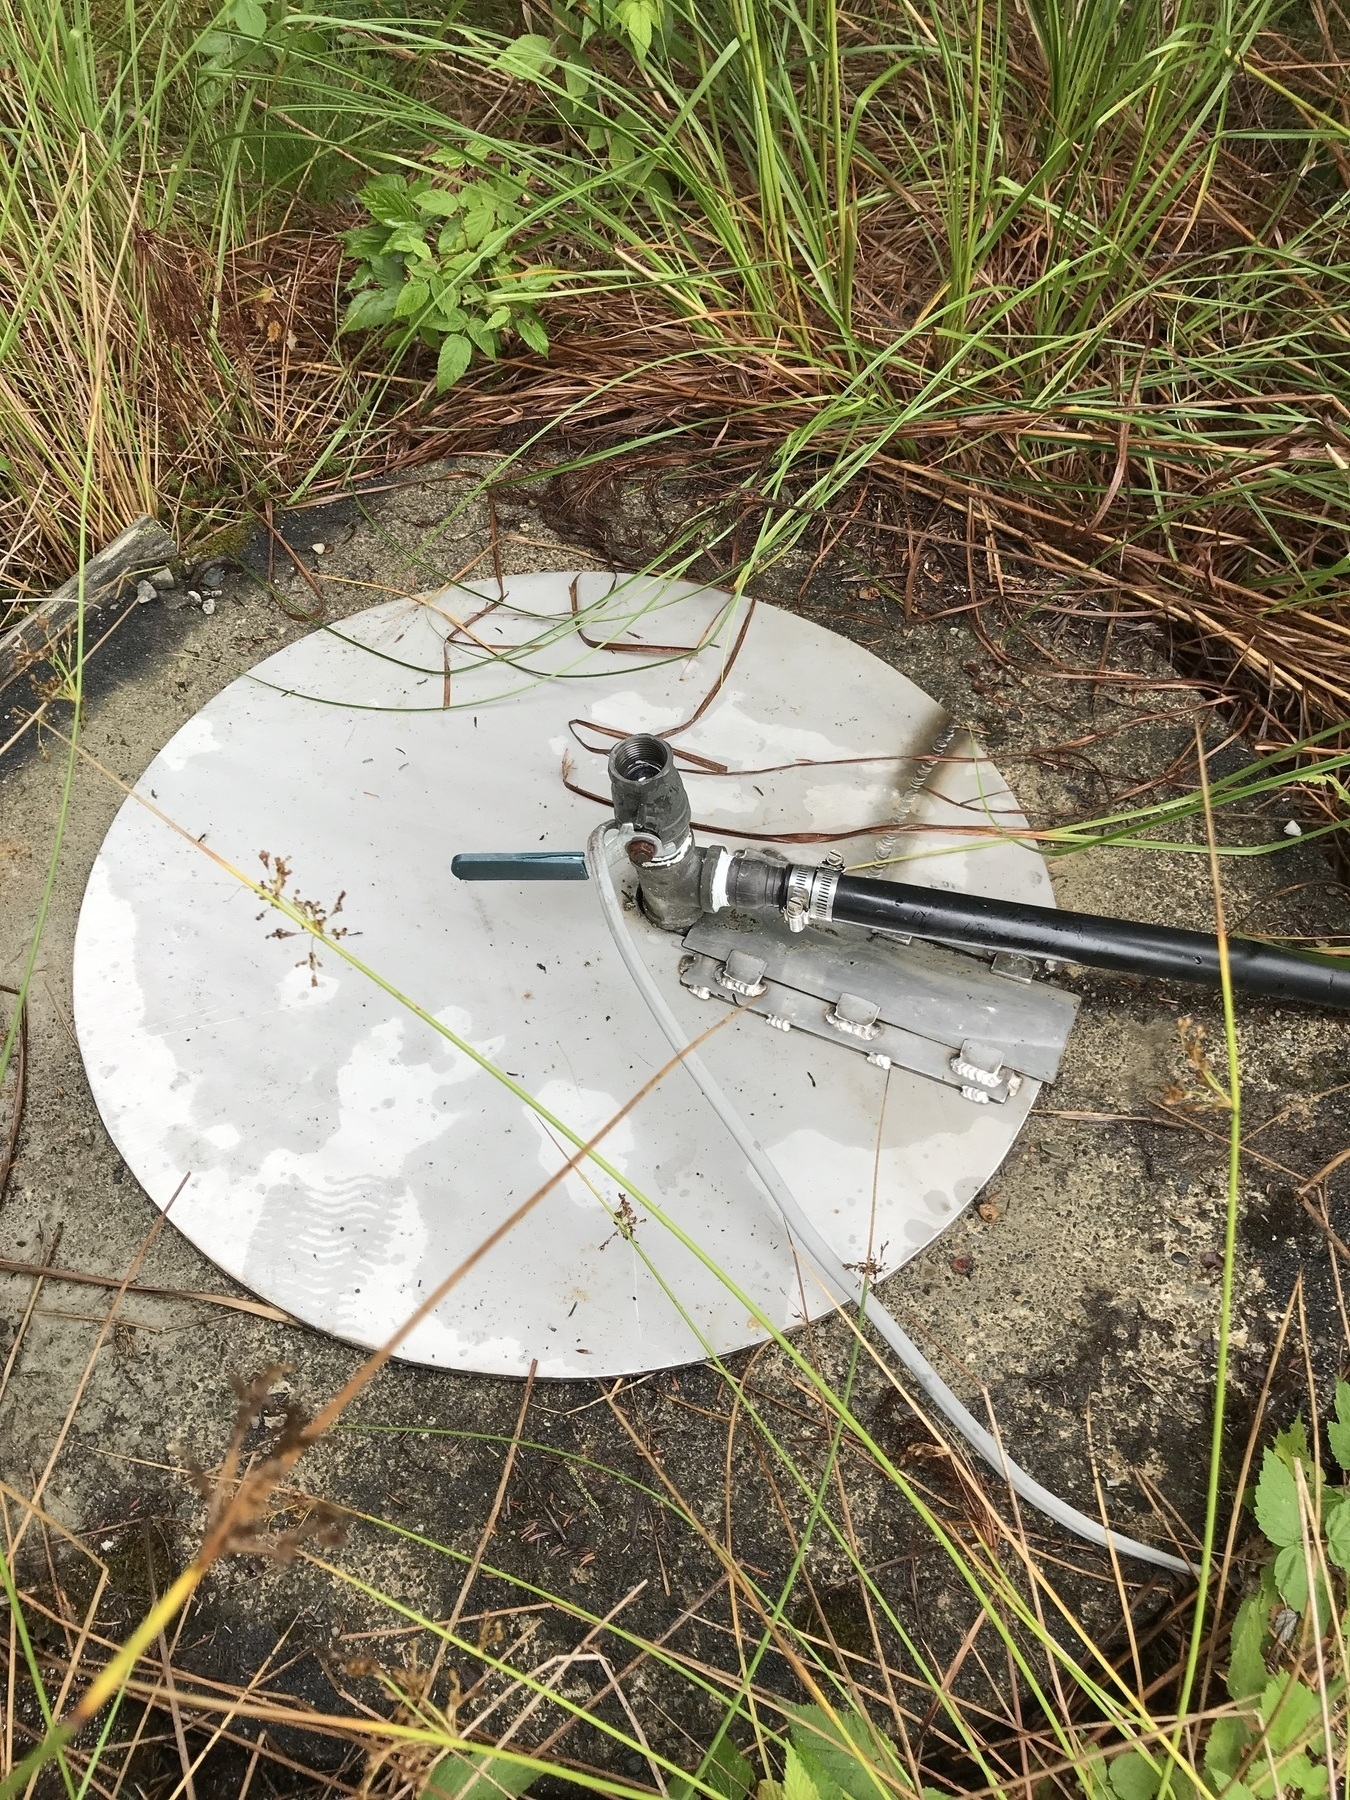 Circular metal cover on concrete well with water hose coming through the center. 